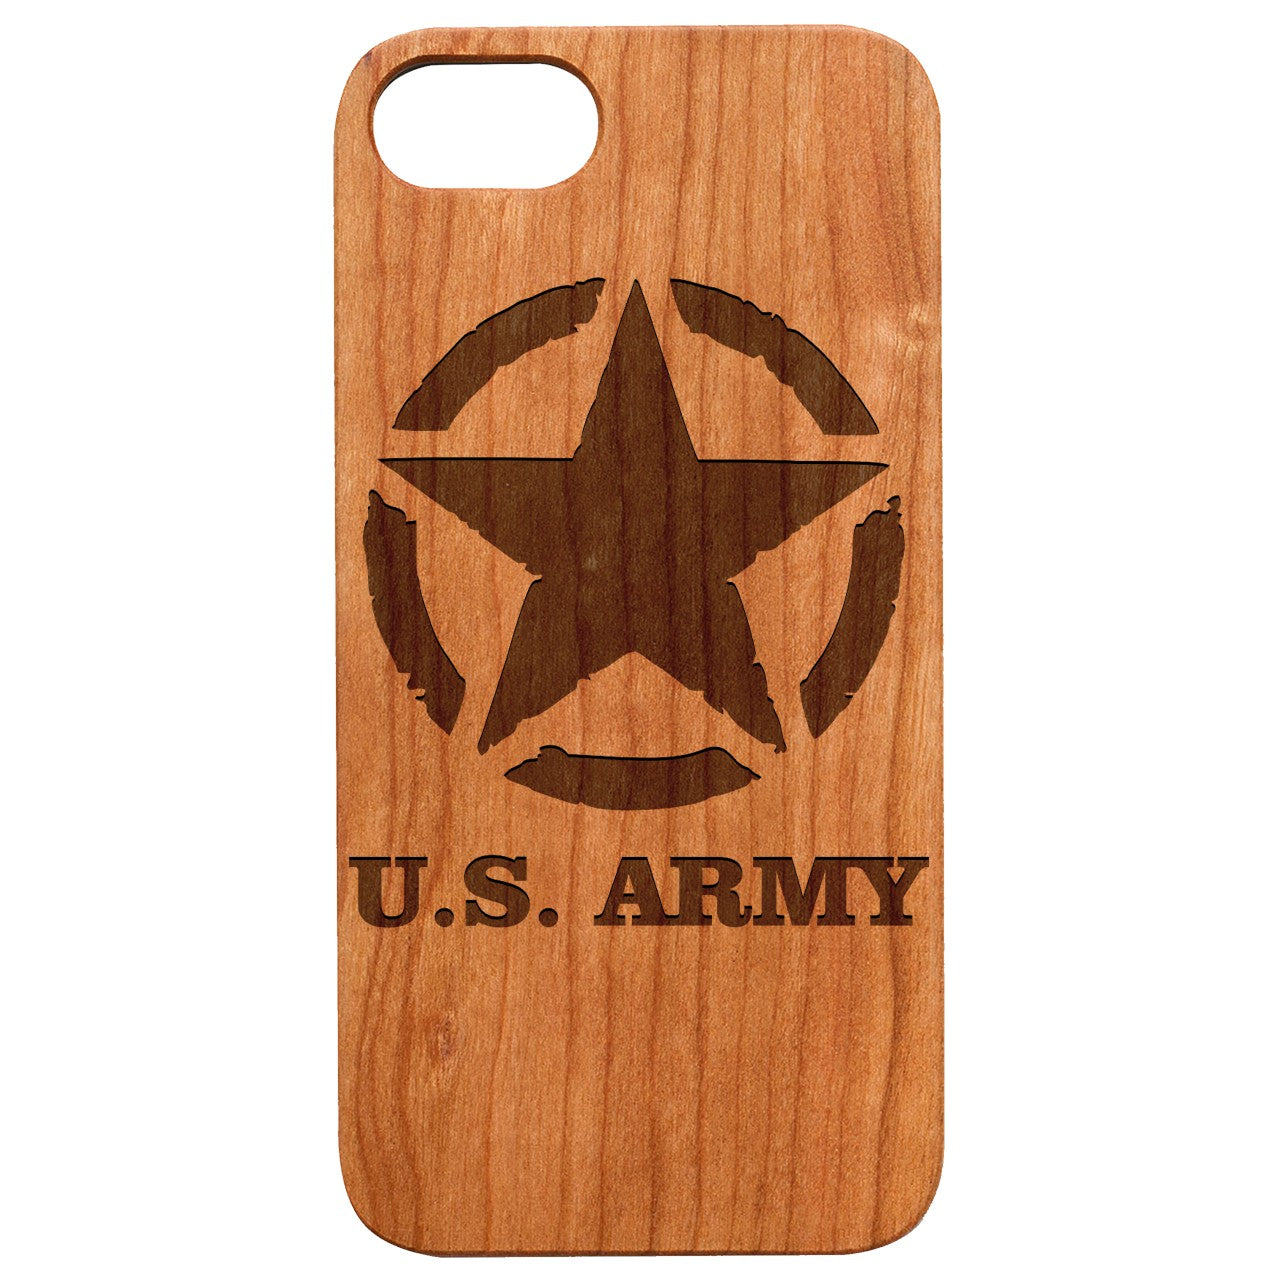  U.S. Army - Engraved - Wooden Phone Case - IPhone 13 Models